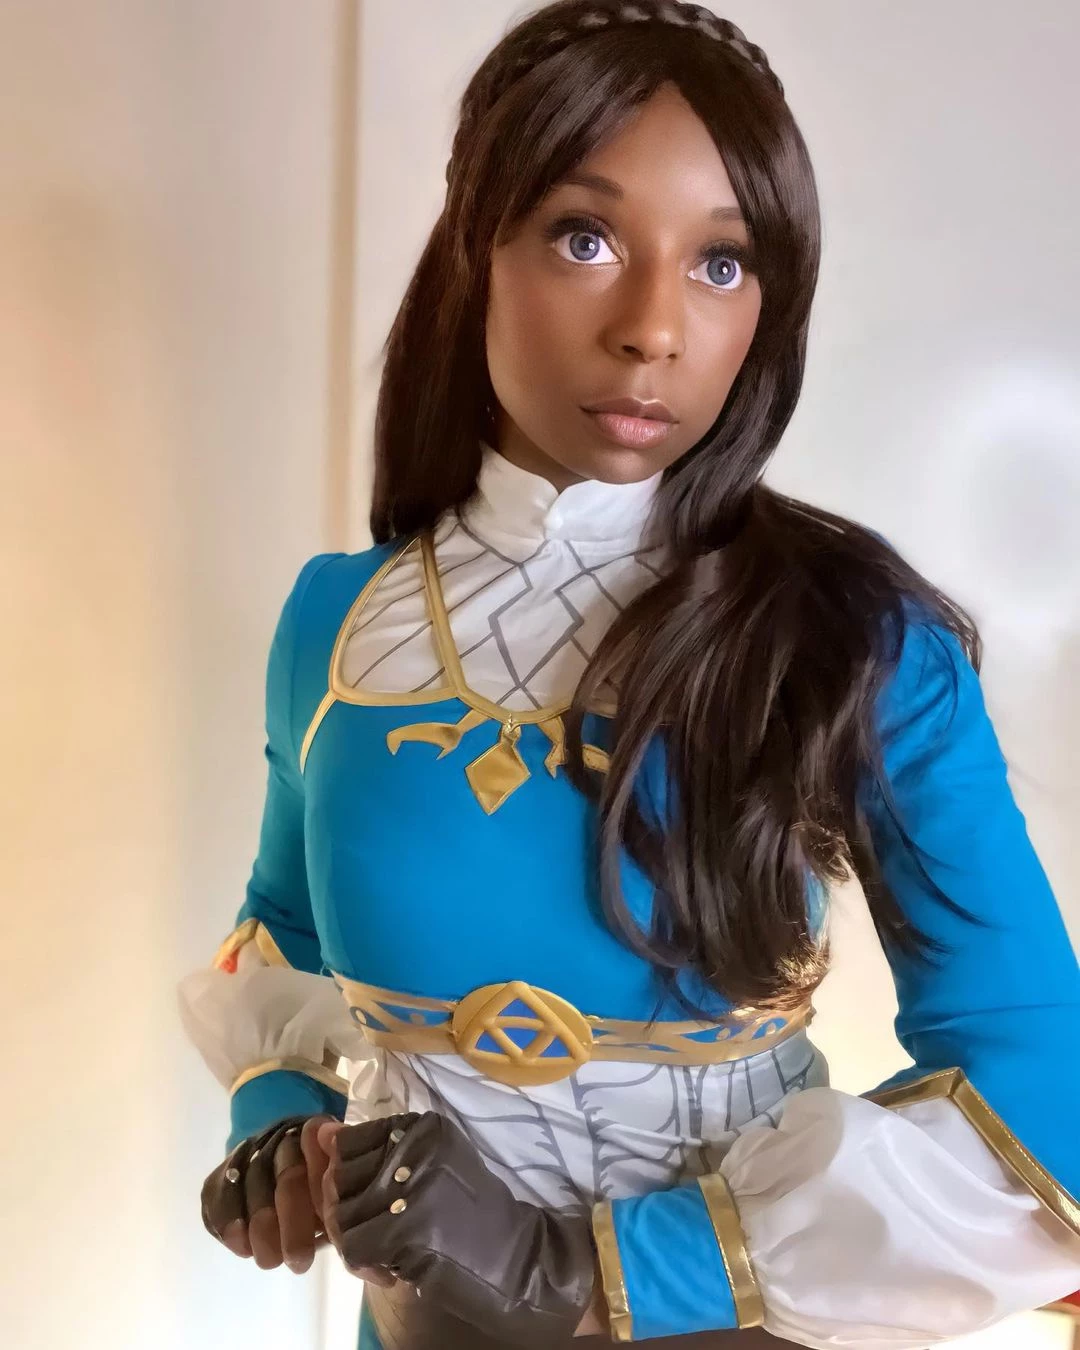 Game Characters Aren’t Out Of The Question For Kriss Either. Here’s The Cosplayer As Zelda